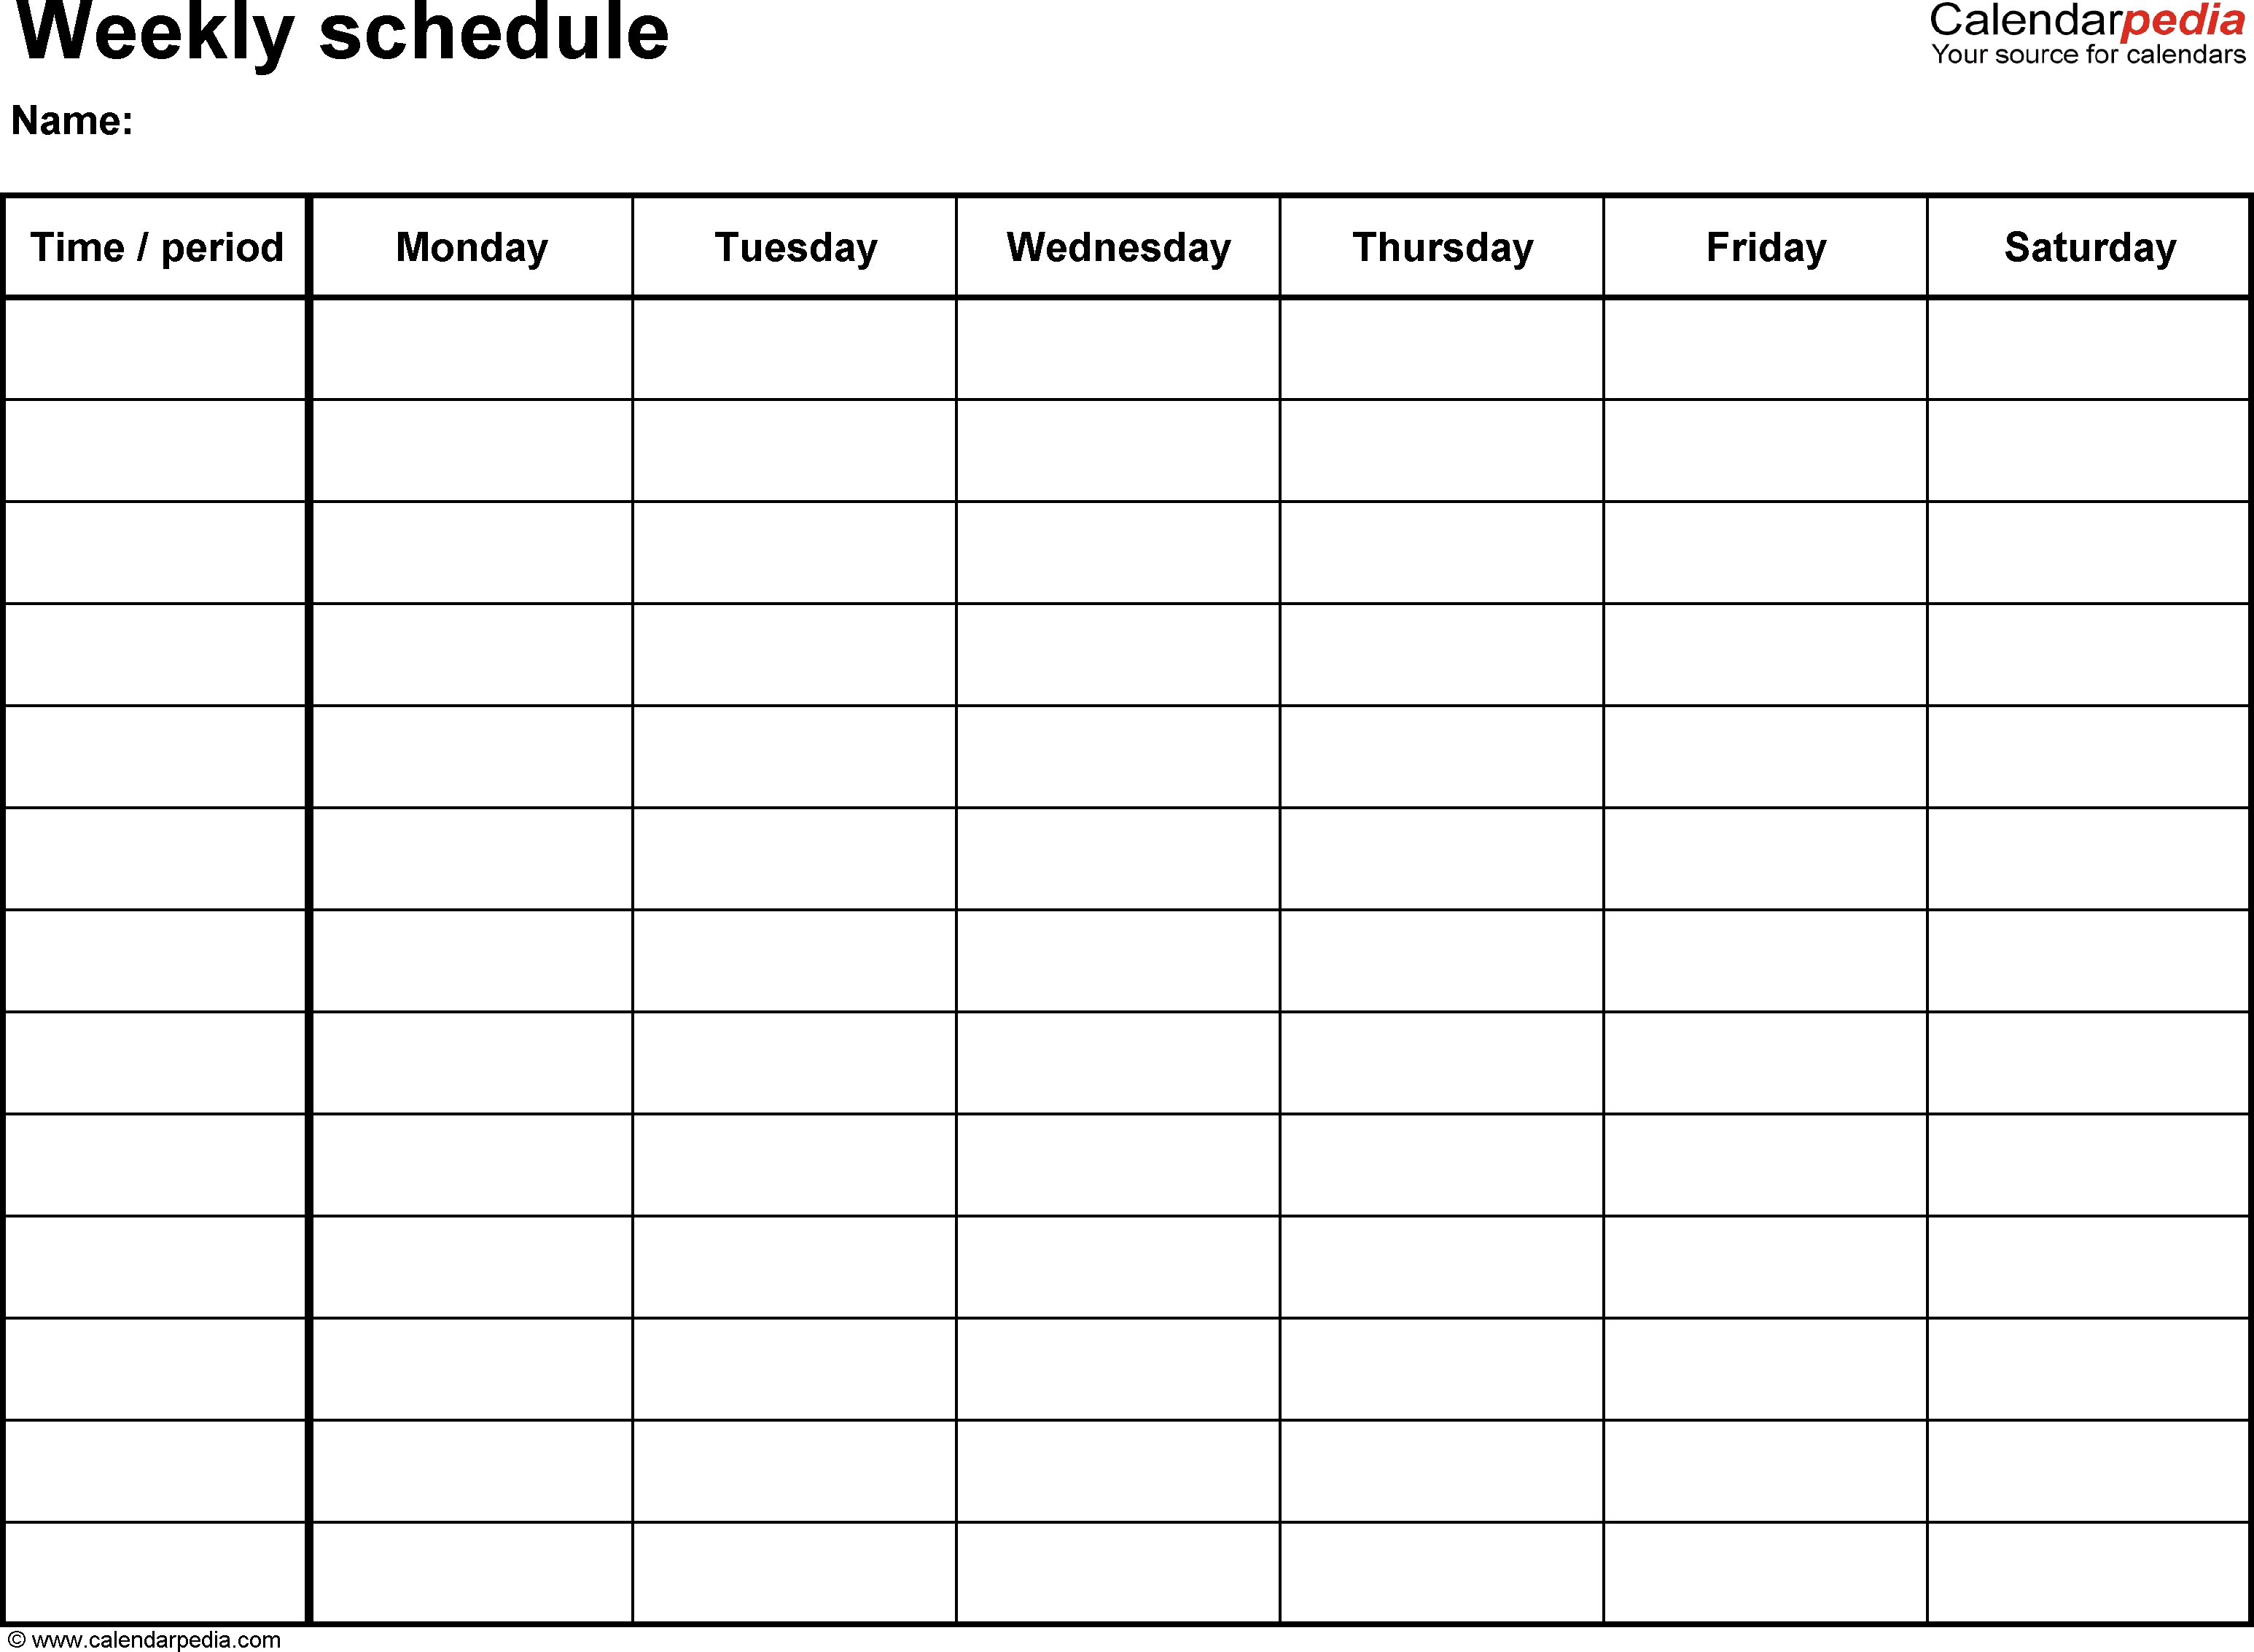 Free Weekly Schedule Templates For Word - 18 Templates within Monday Through Friday Activity Schedule